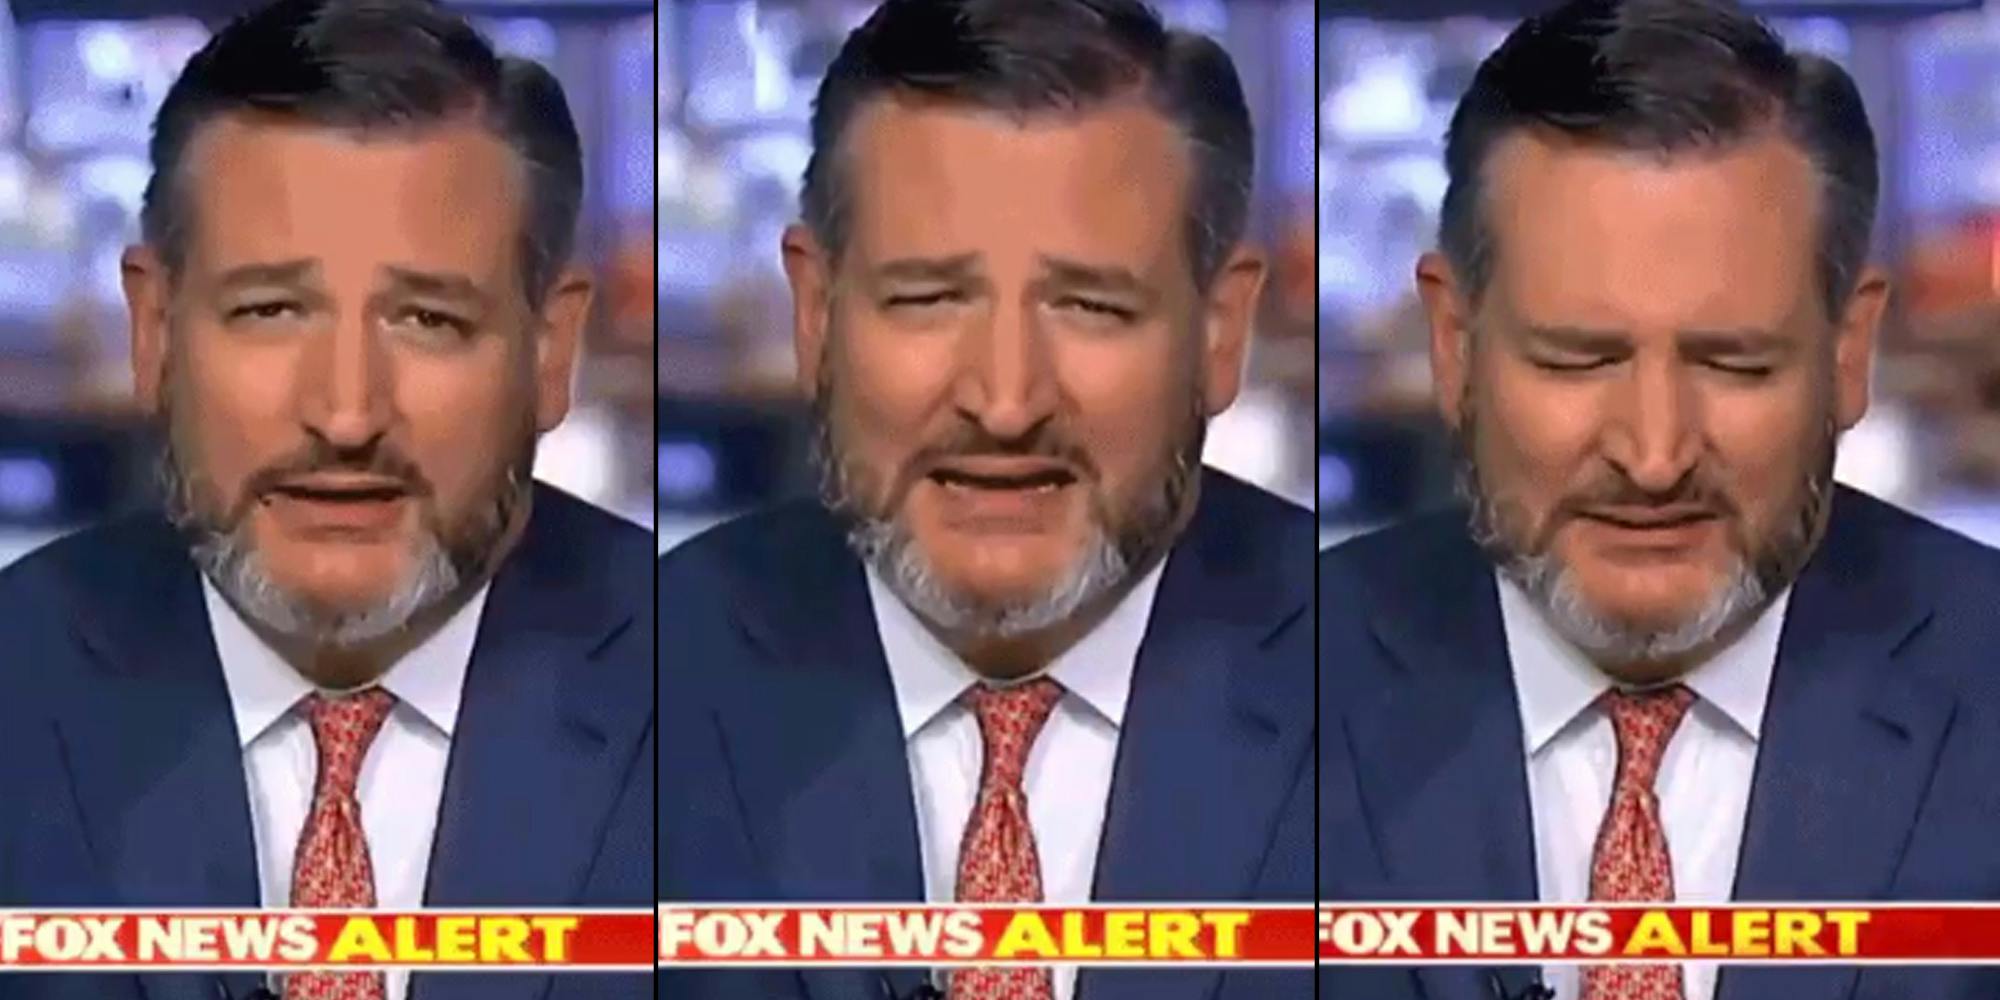 Three screenshots from a fake video showing Ted Cruz eating a fly during a Fox News interview.